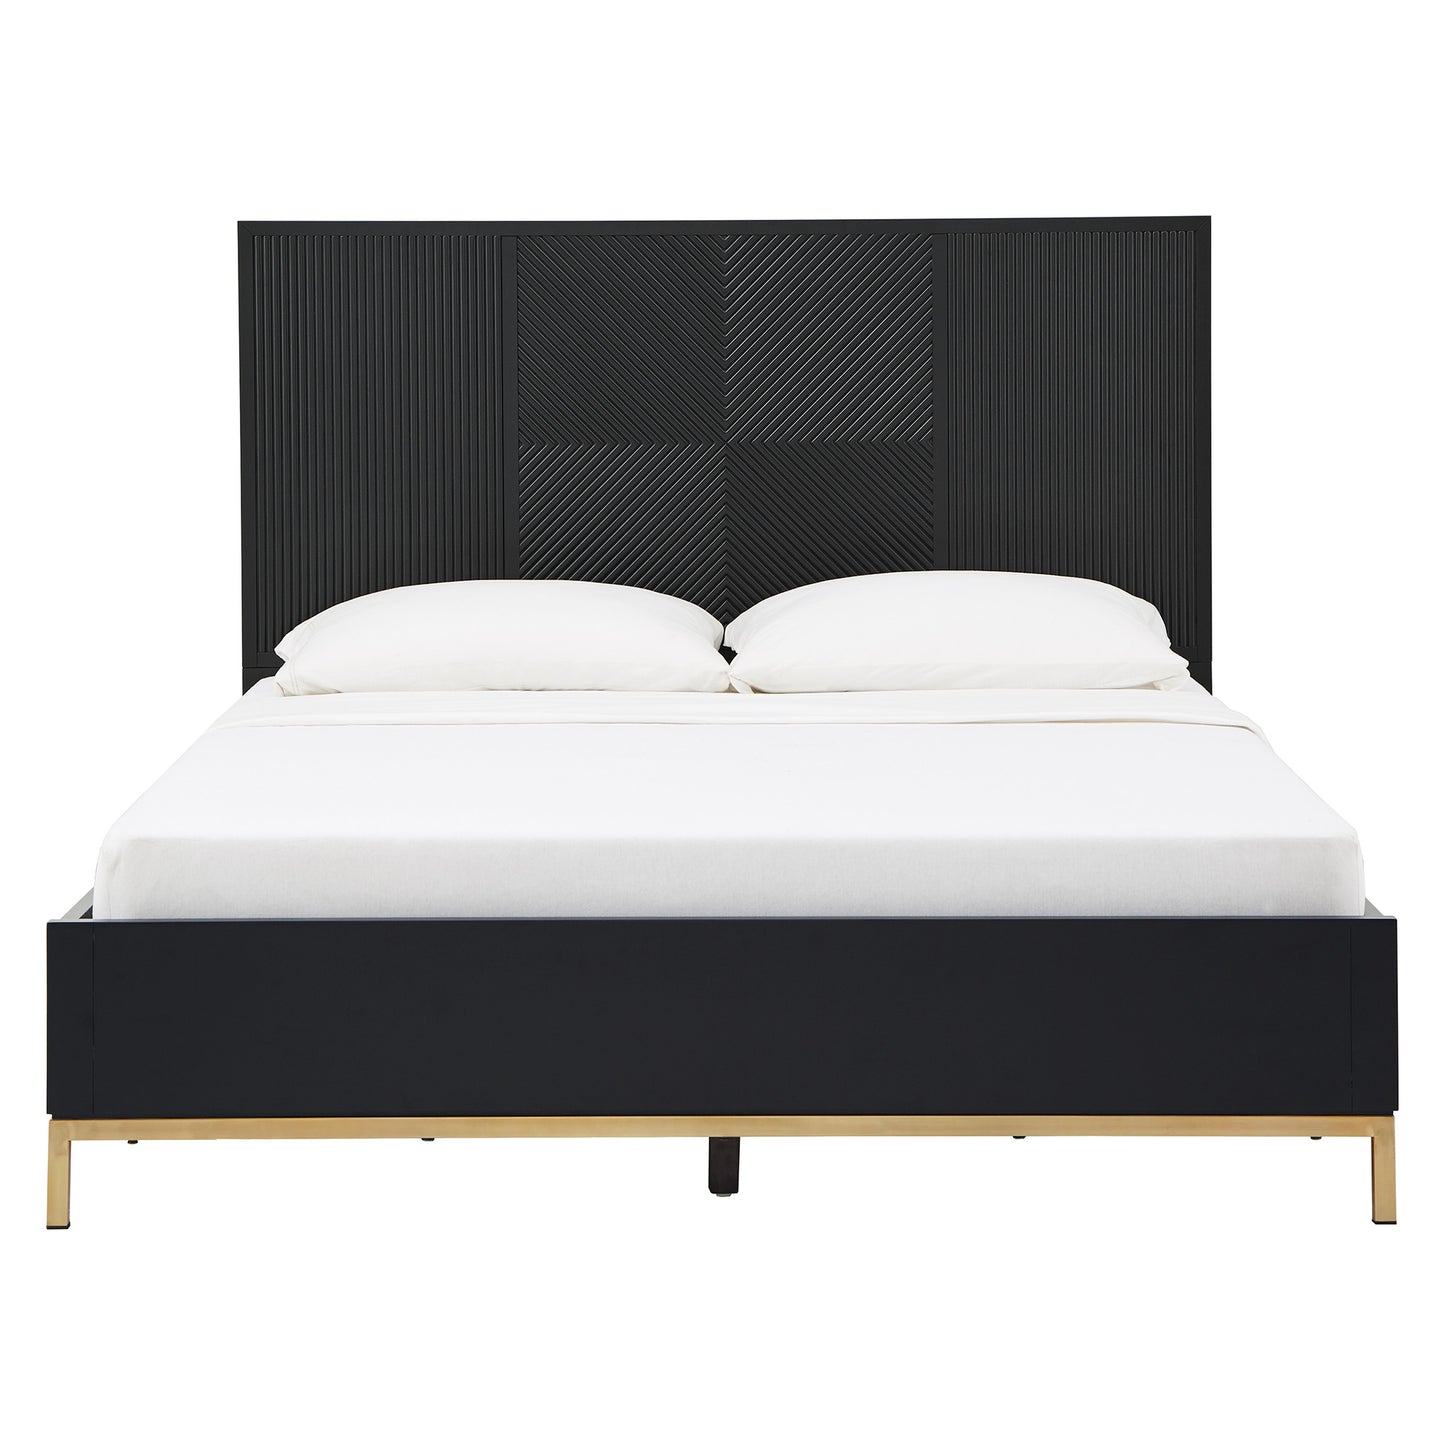 Low Profile Platform Bed - Black Finish, Gold Accent, Queen